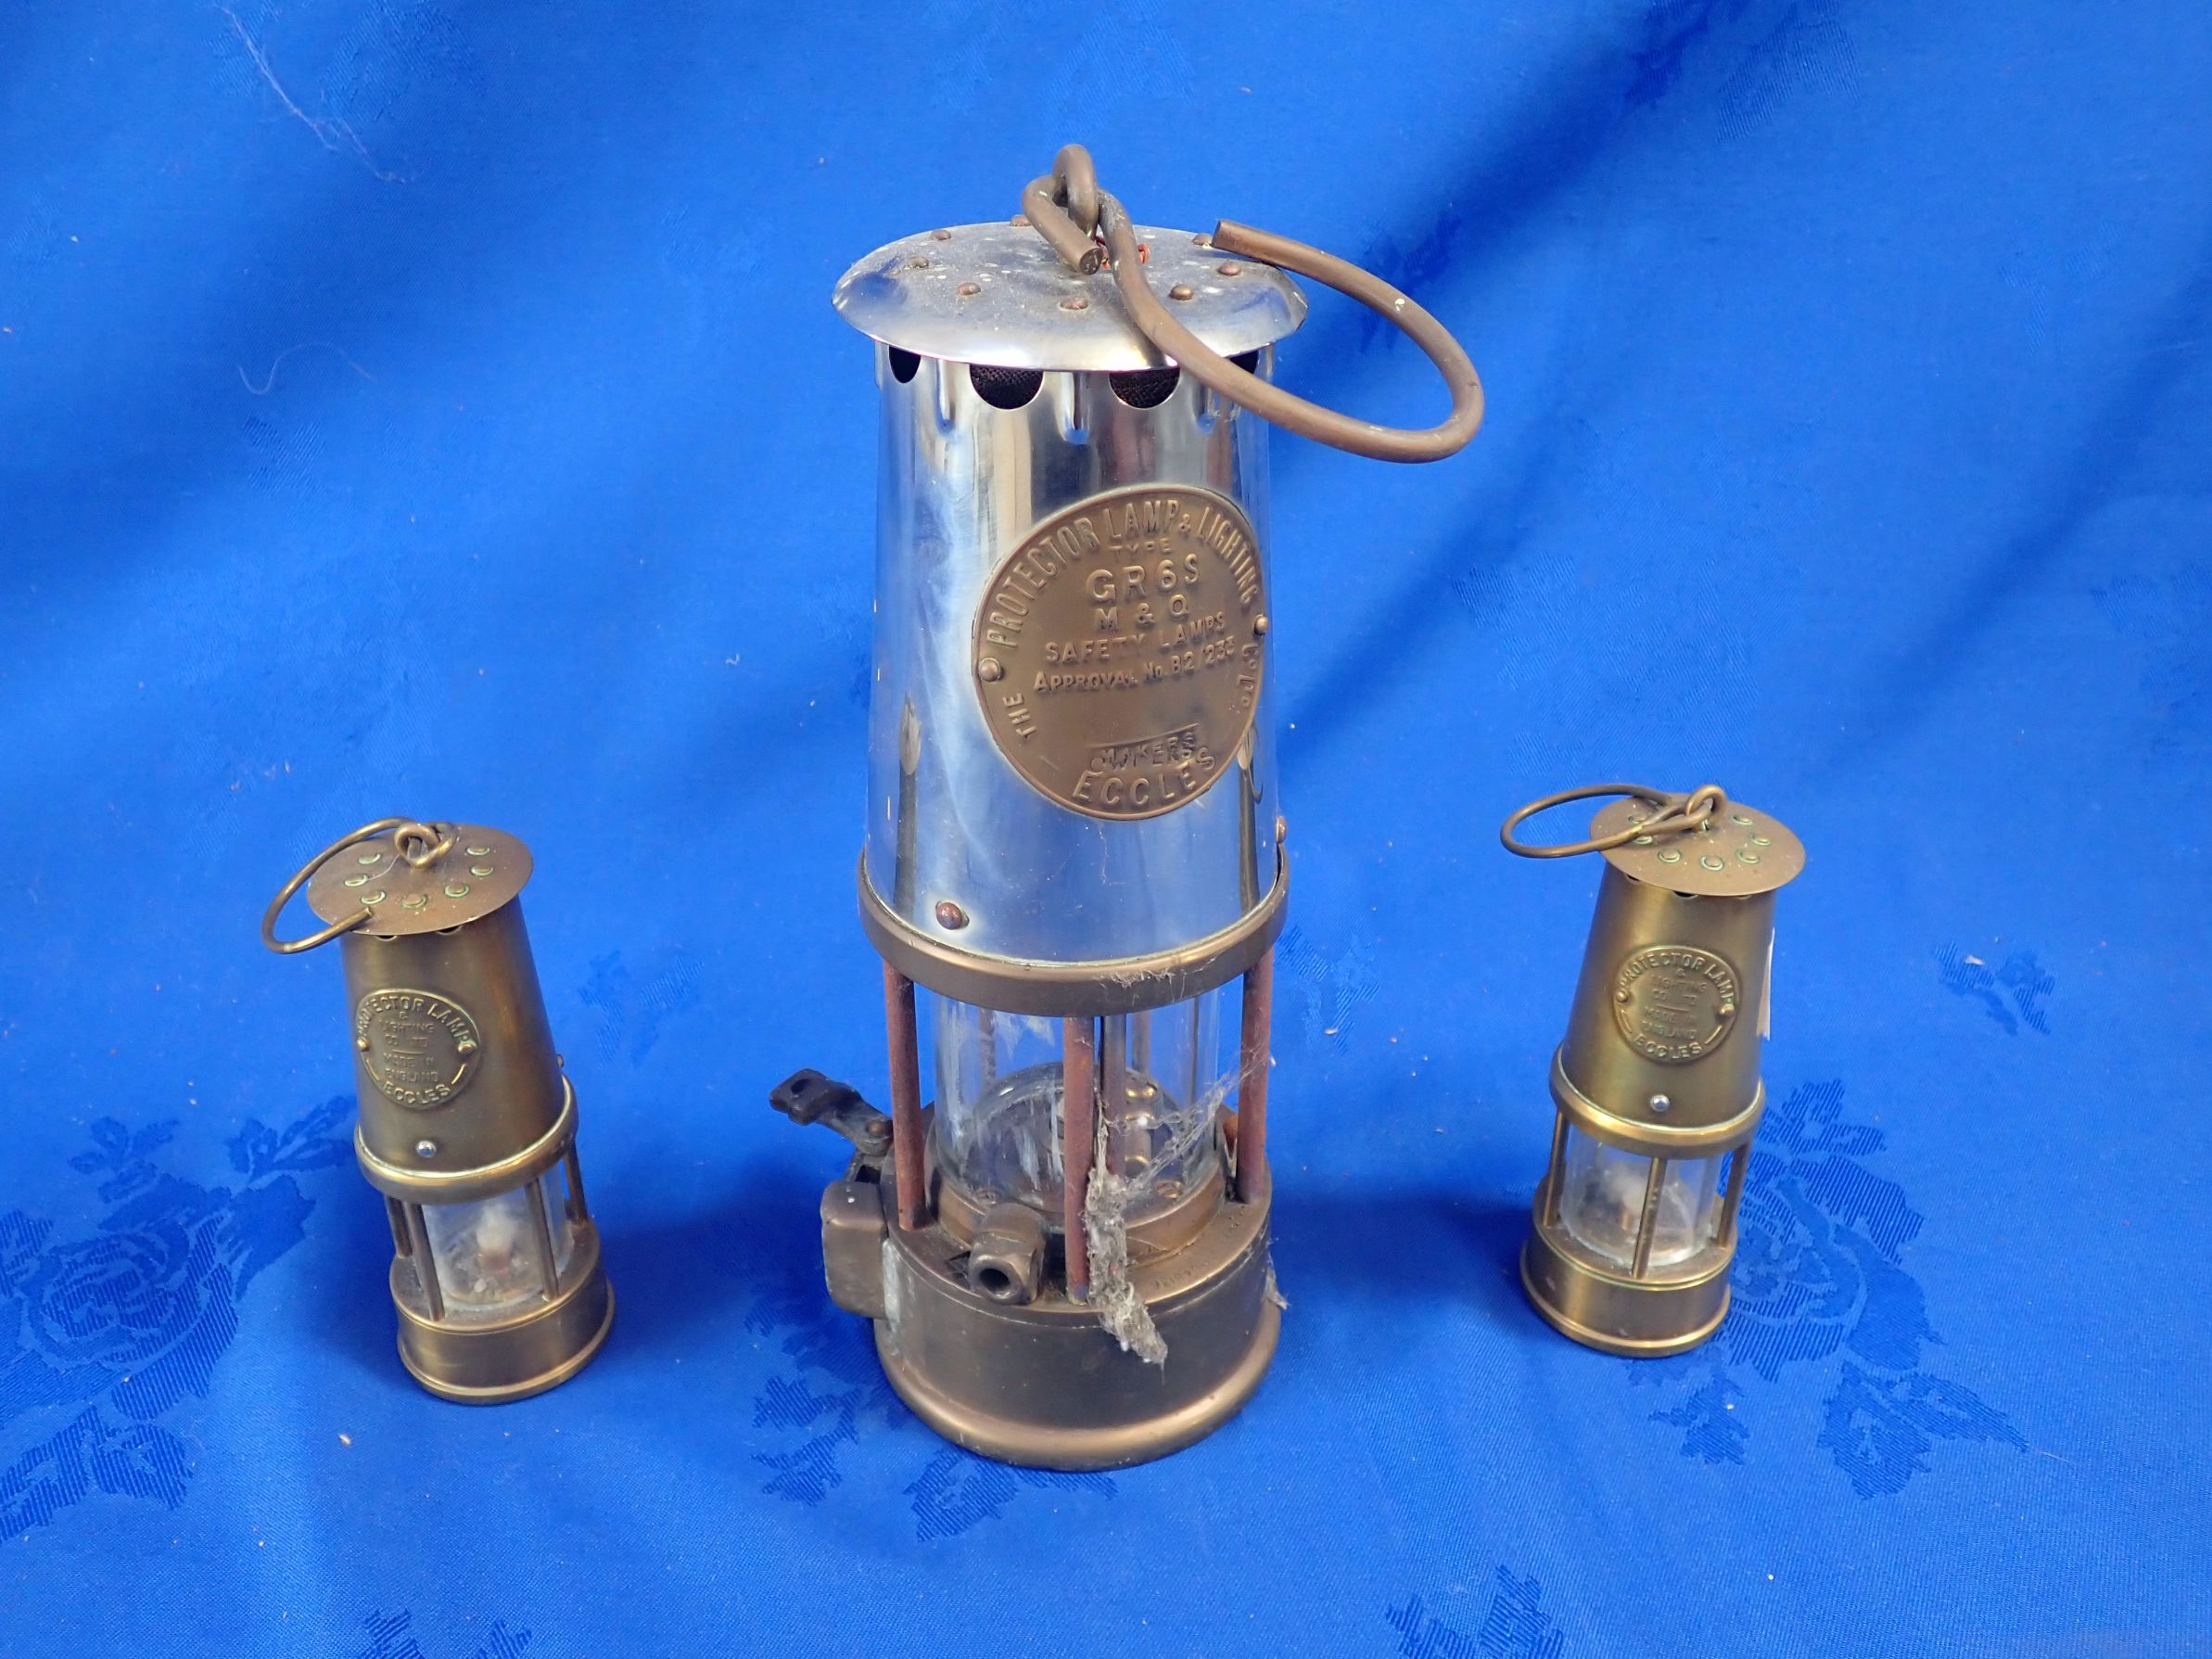 A MINER'S LAMP; 'THE PROTECTOR LAMP AND LIGHTING CO. LTD.'